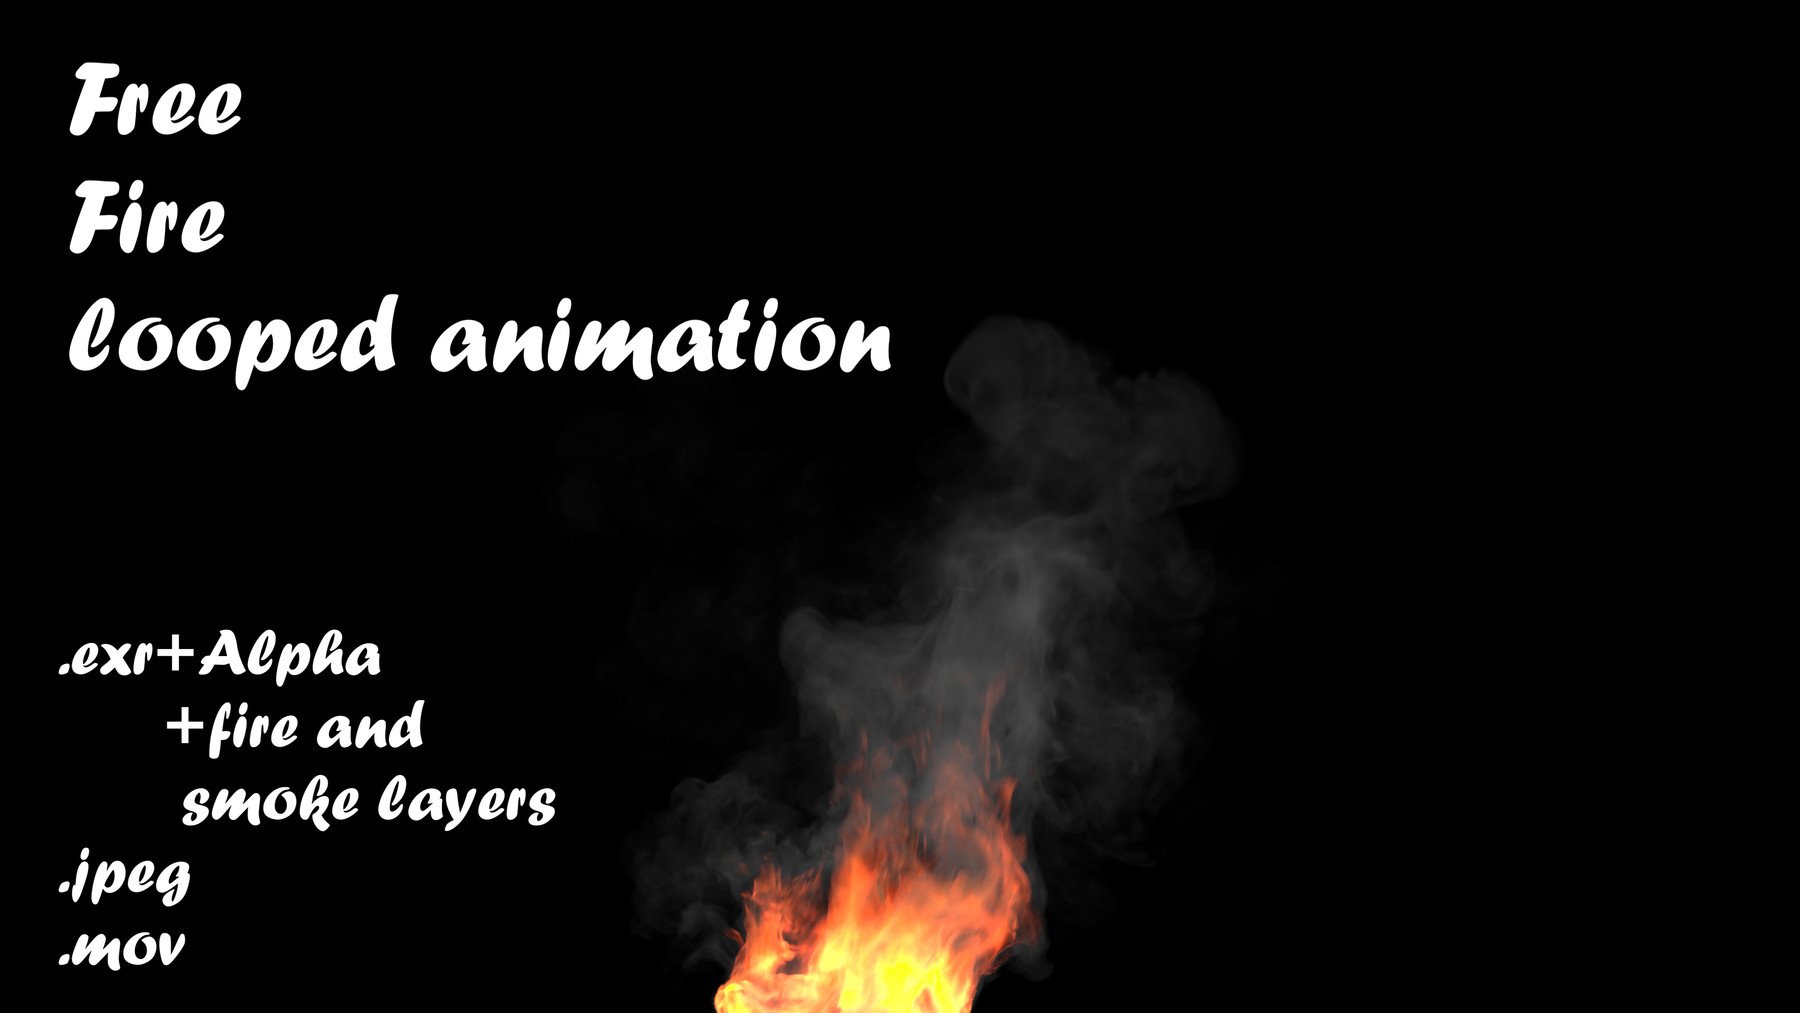 ArtStation - Fire with smoke looped sequence animation free | Resources